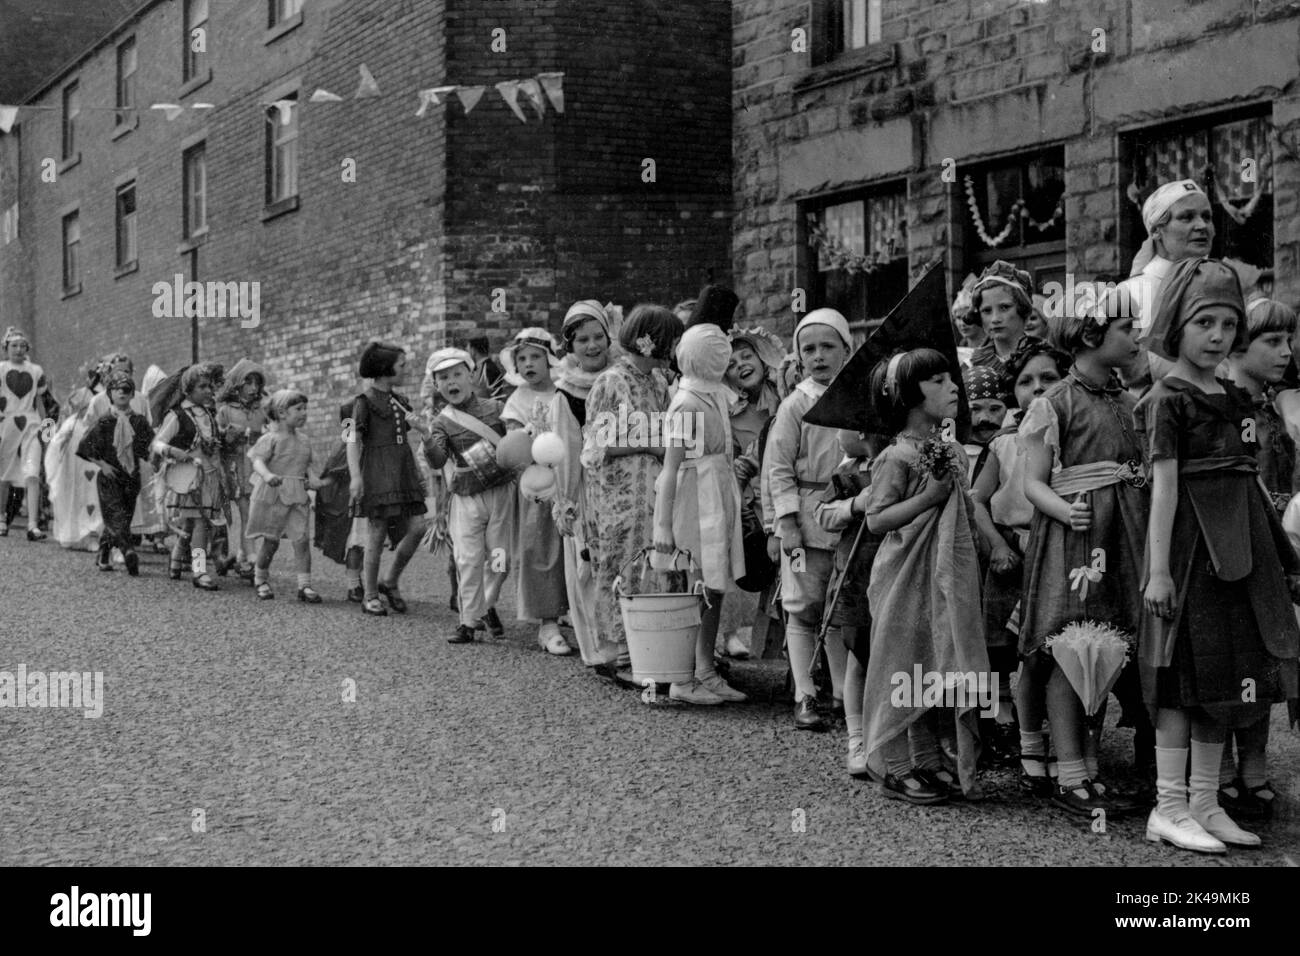 Excited youngsters in homemade fancy dress laugh and chatter as they wait, probably in Wakefield Road, to walk on in the procession held on 6 May 1935 to celebrate the Silver Jubilee of King George V at Denby Dale in West Yorkshire, England, UK. Stock Photo